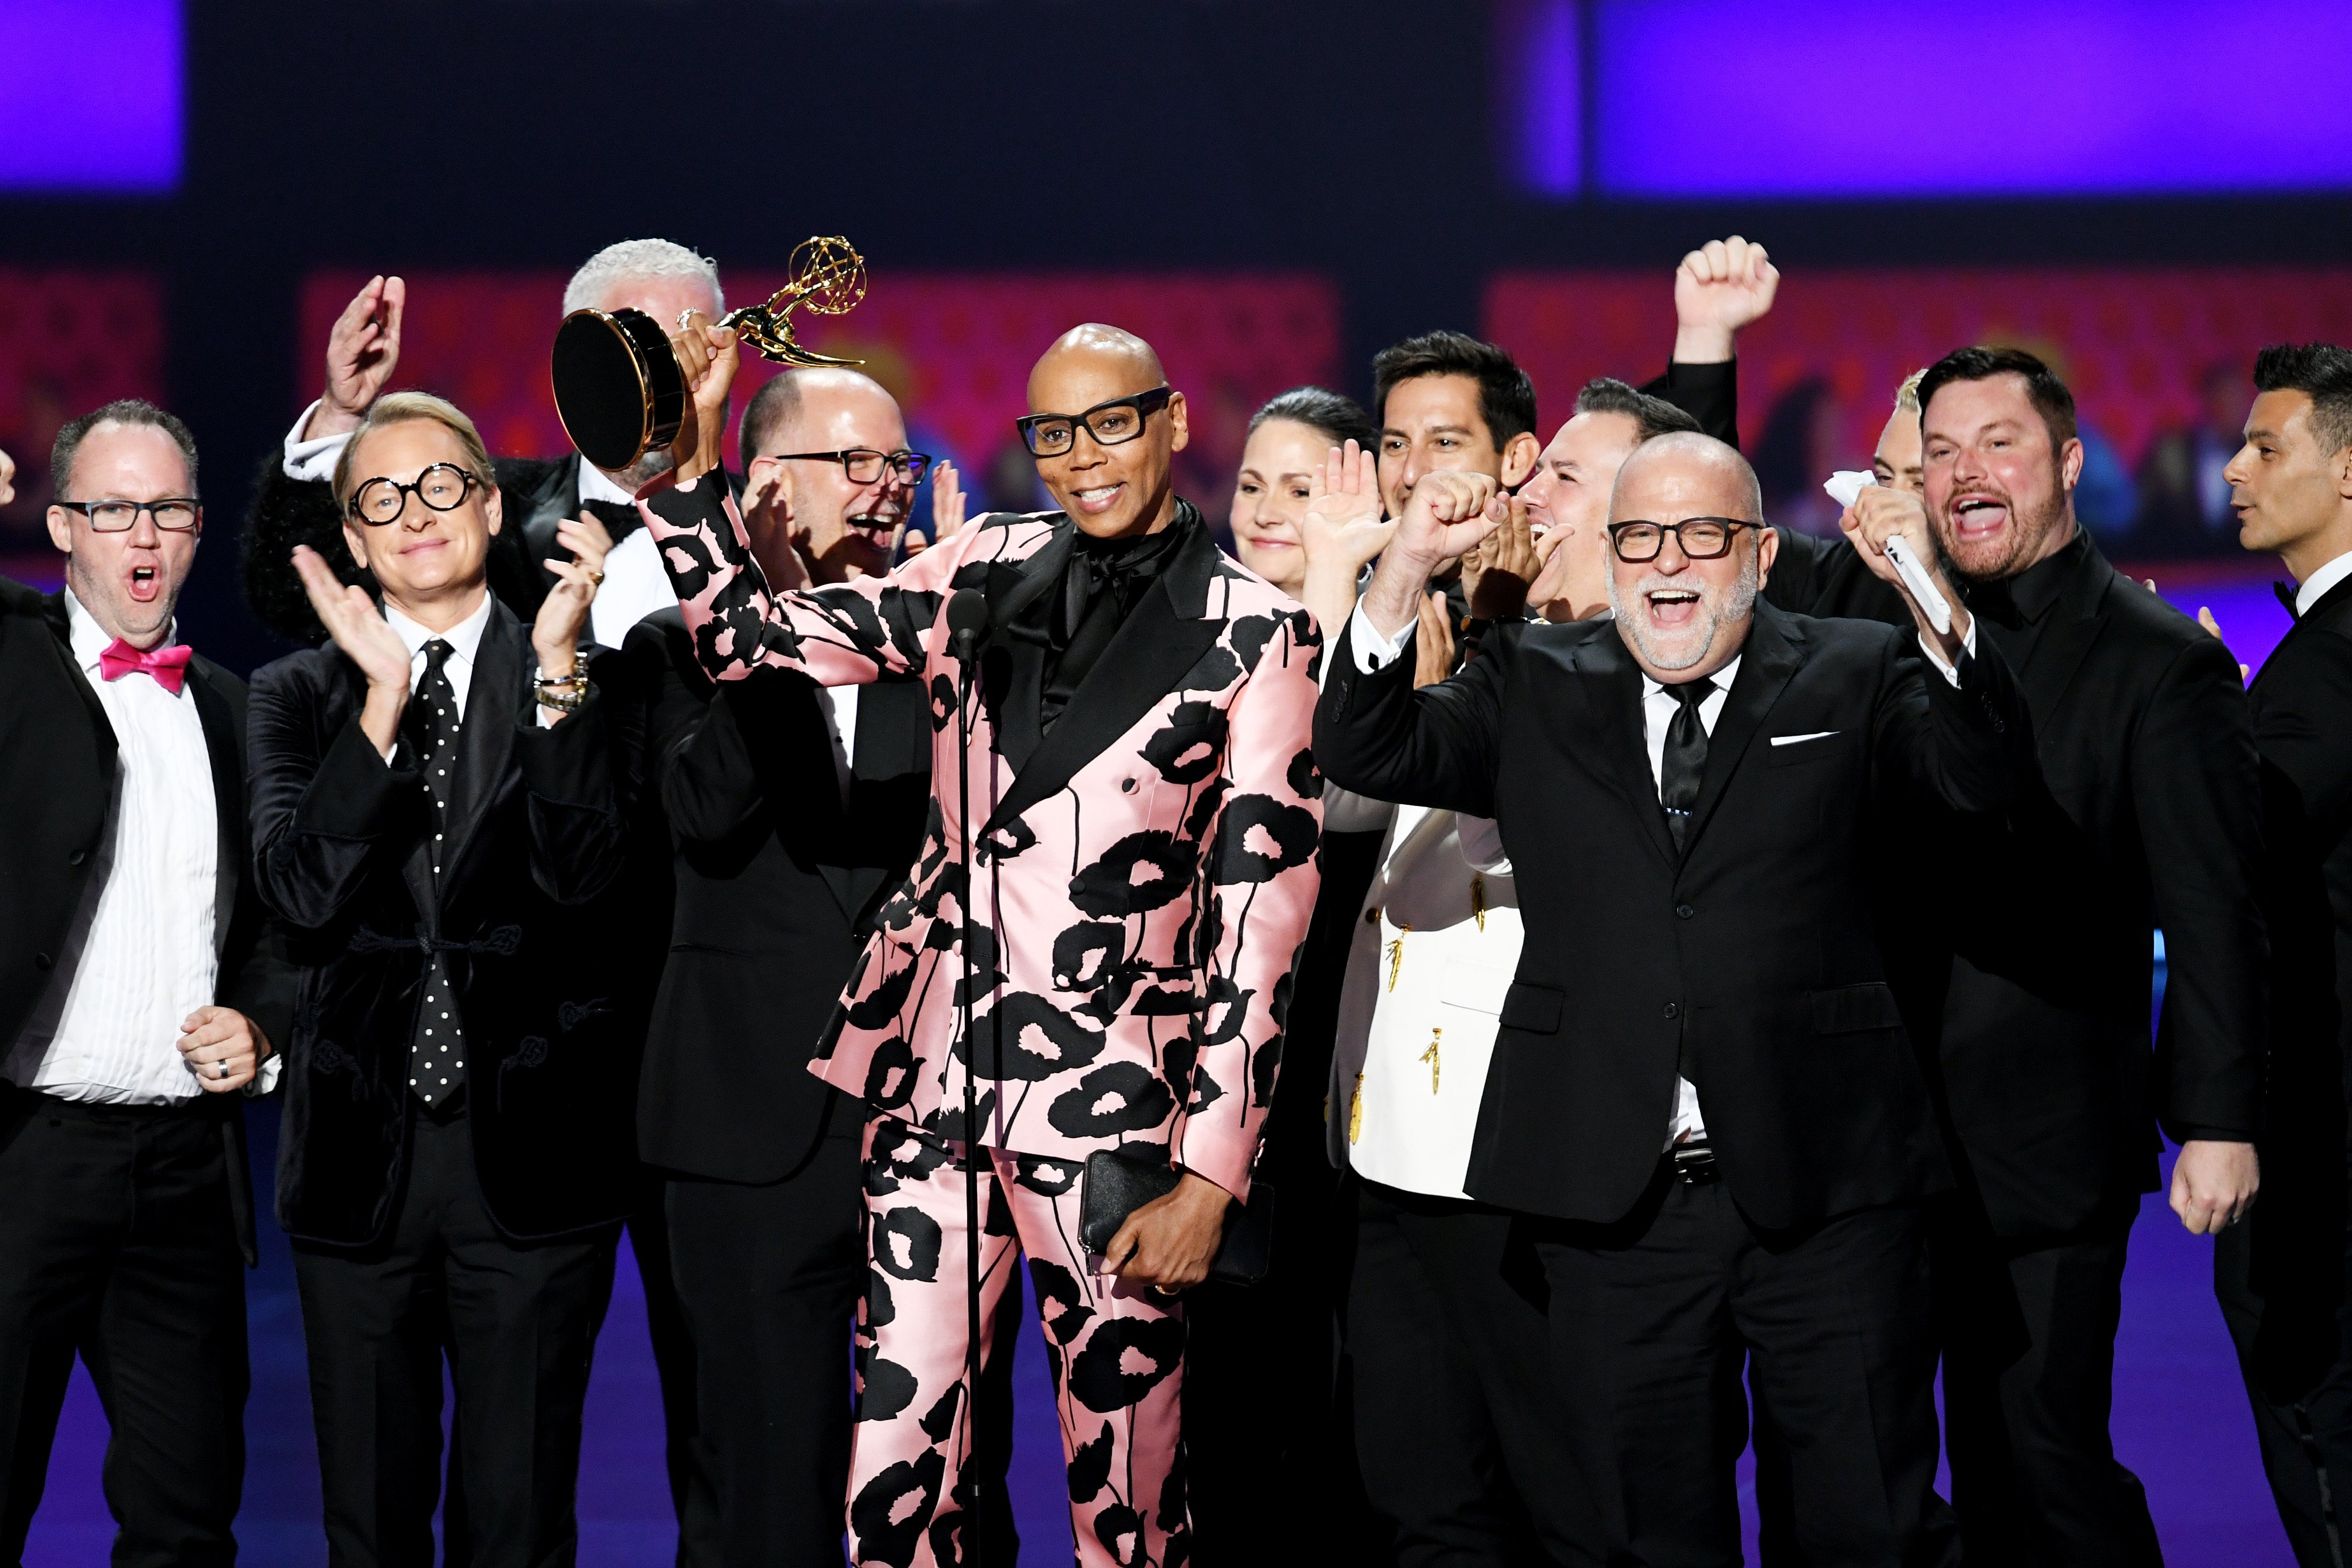 Cast and crew of 'RuPaul's Drag Race' accept the Outstanding Competition Program award onstage during the 71st Emmy Awards